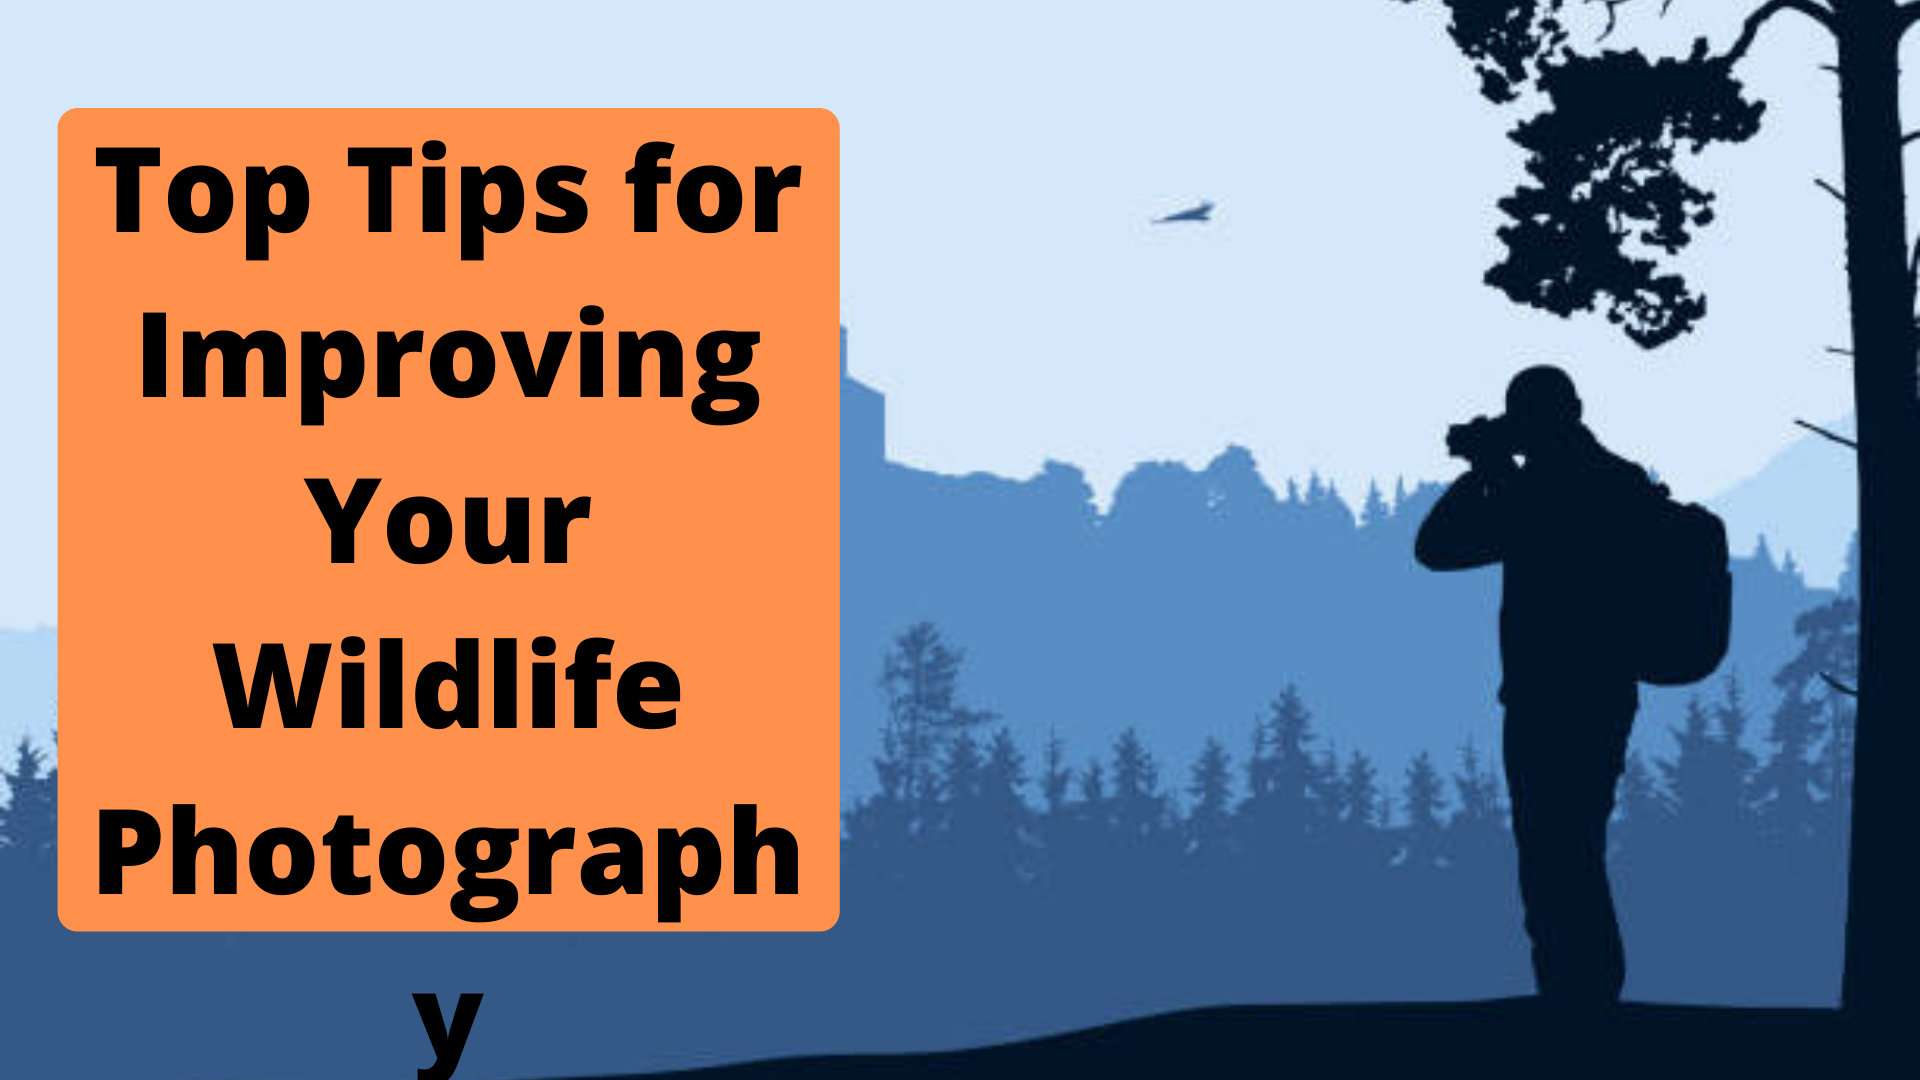 Top Tips for Improving Your Wildlife Photography